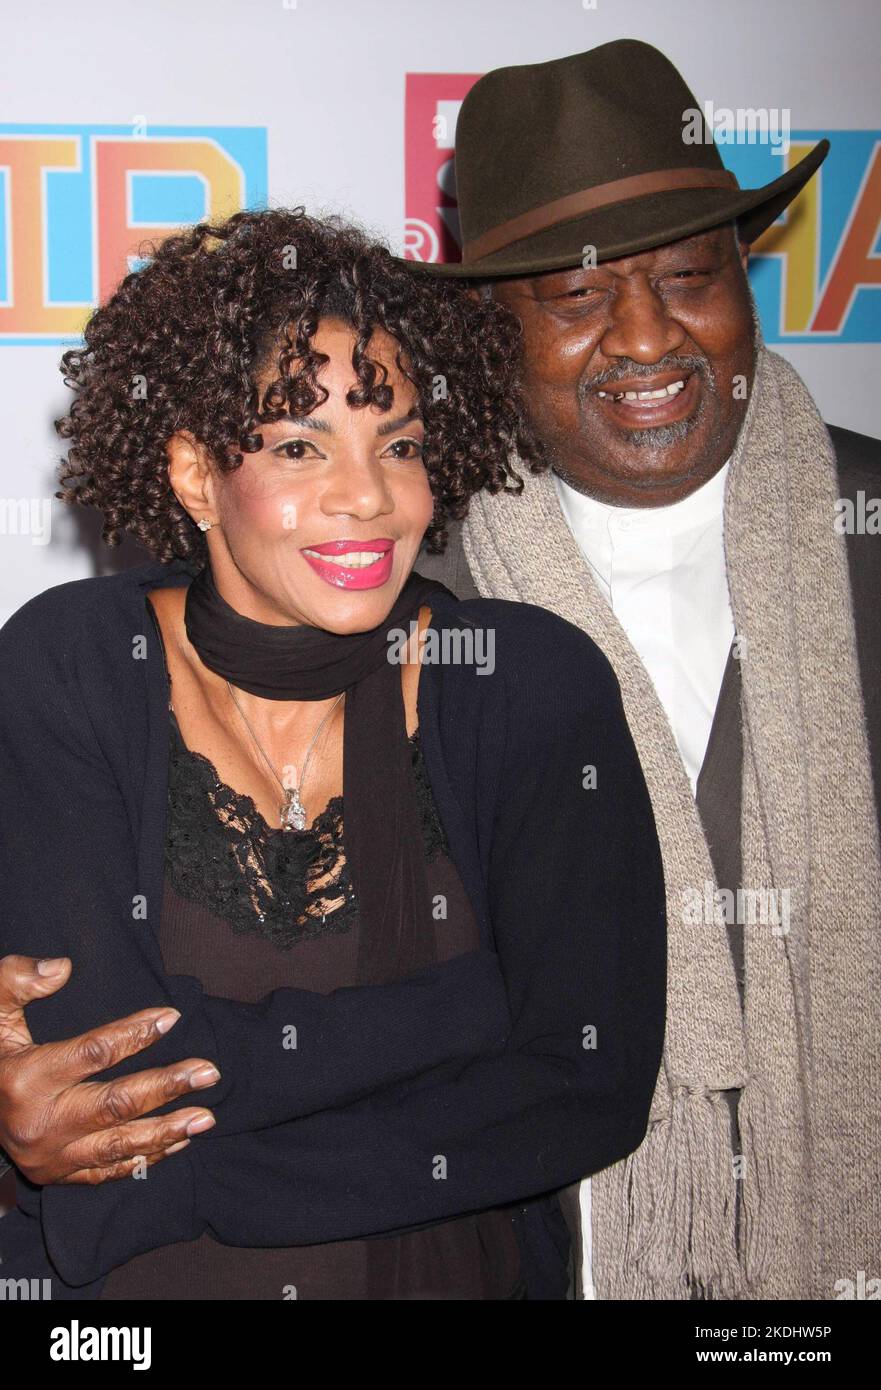 Melba Moore and Bernard 'Pretty' Purdie attend the opening night performance of the Broadway revival of 'Hair: The American Tribal Love-Rock Musical' at the Al Hirschfeld Theatre in New York City on March 31, 2009.  Photo Credit: Henry McGee/MediaPunch Stock Photo